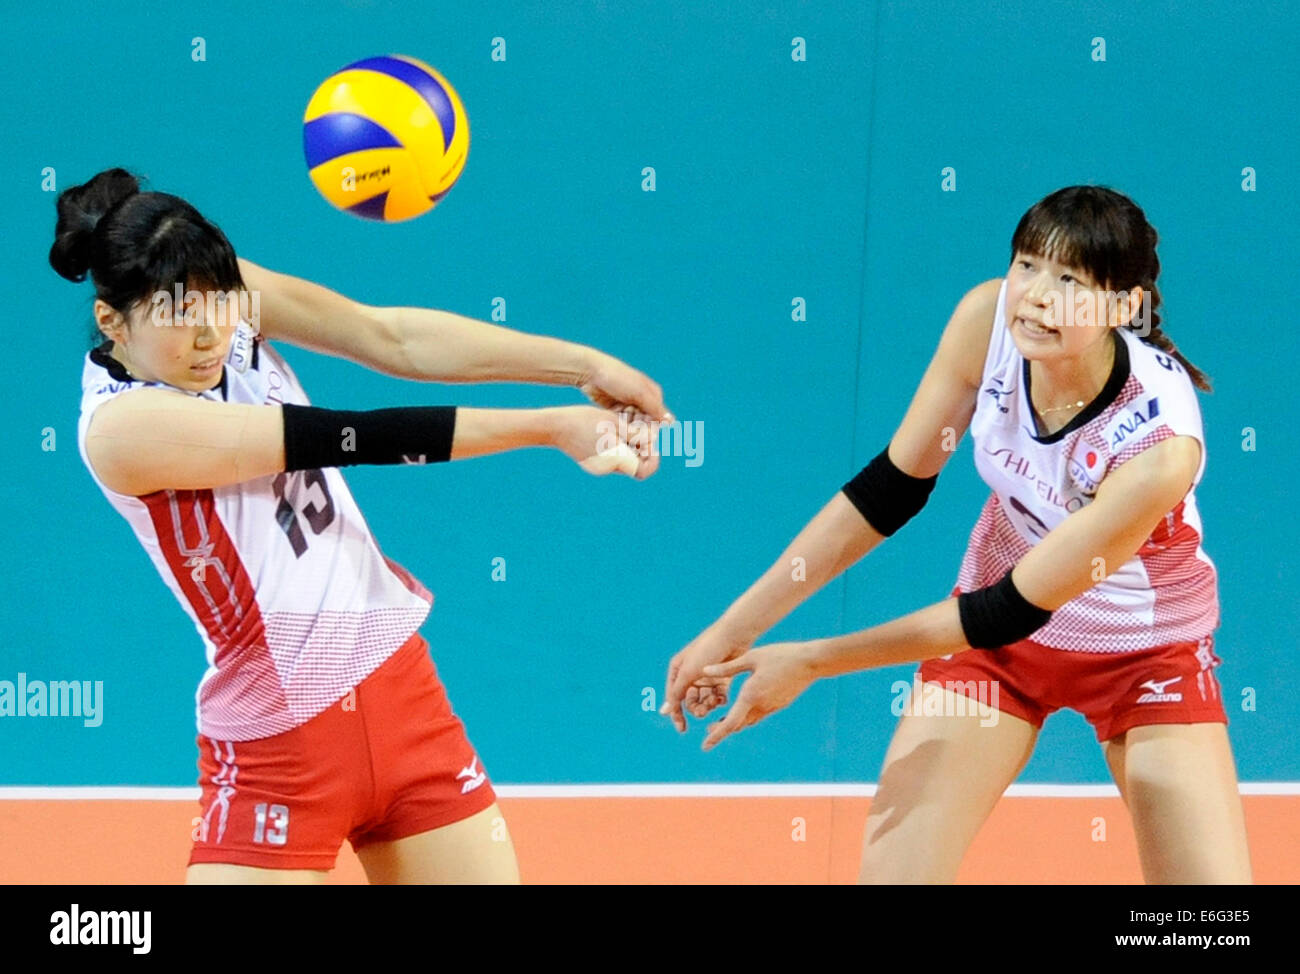 Tokyo, Japan. 22nd Aug, 2014. Risa Shinnabe (L) and Saori Kimura of Japan receive the ball during the final round match against China in FIVB Women's Volleyball World Grand Prix 2014 in Tokyo, Japan, Aug. 22, 2014. Japan won 3-0. Credit:  Stringer/Xinhua/Alamy Live News Stock Photo